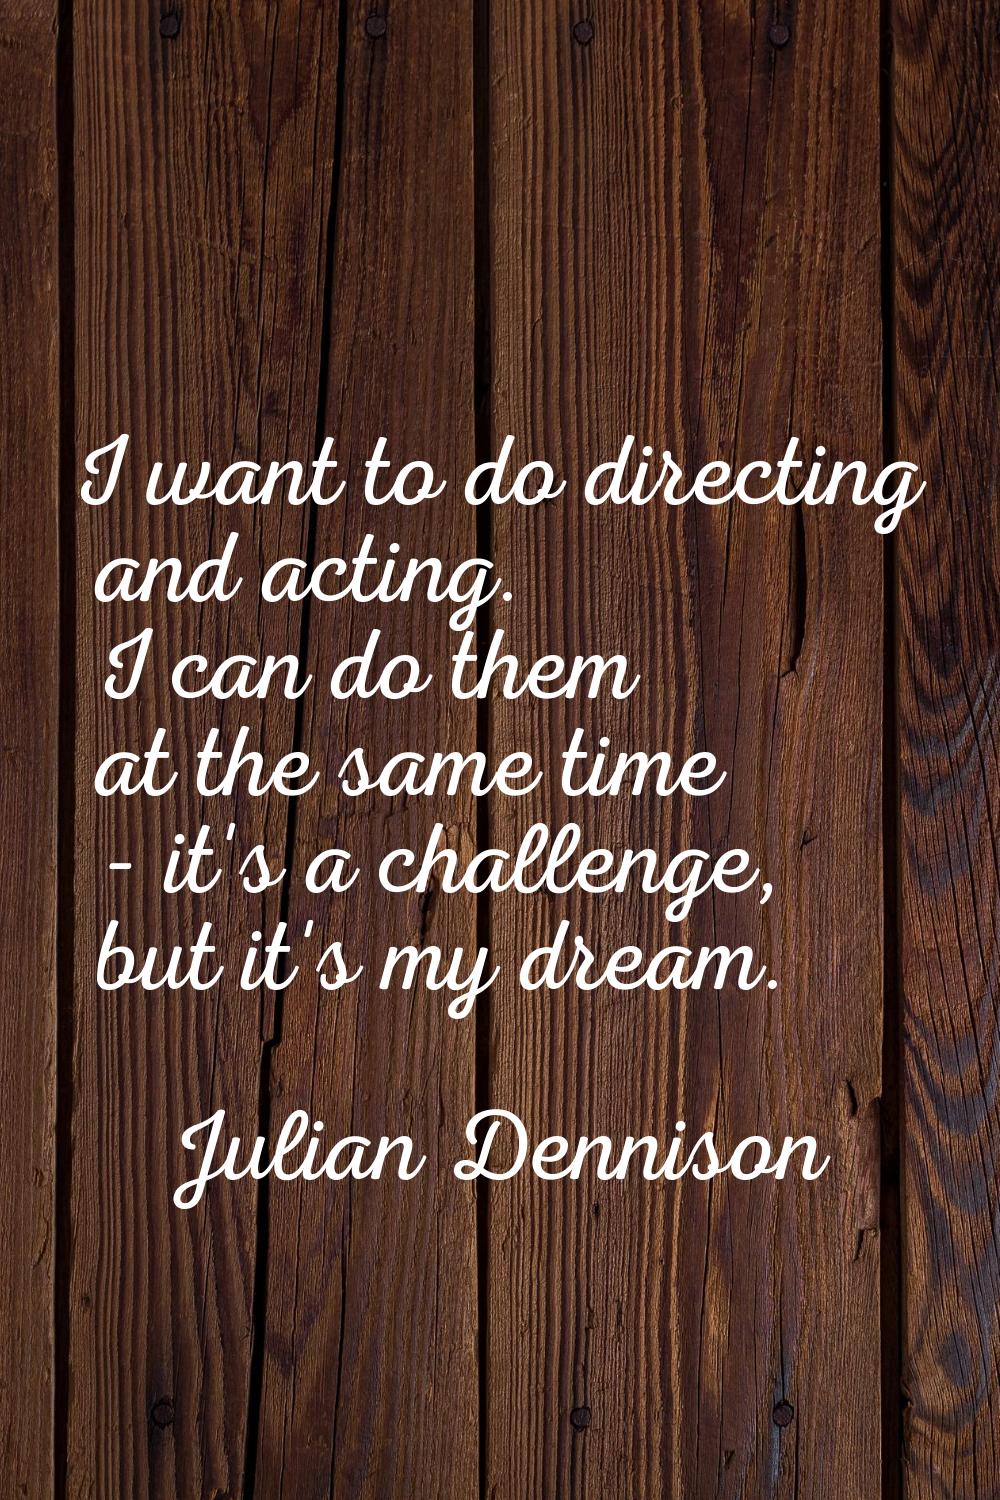 I want to do directing and acting. I can do them at the same time - it's a challenge, but it's my d